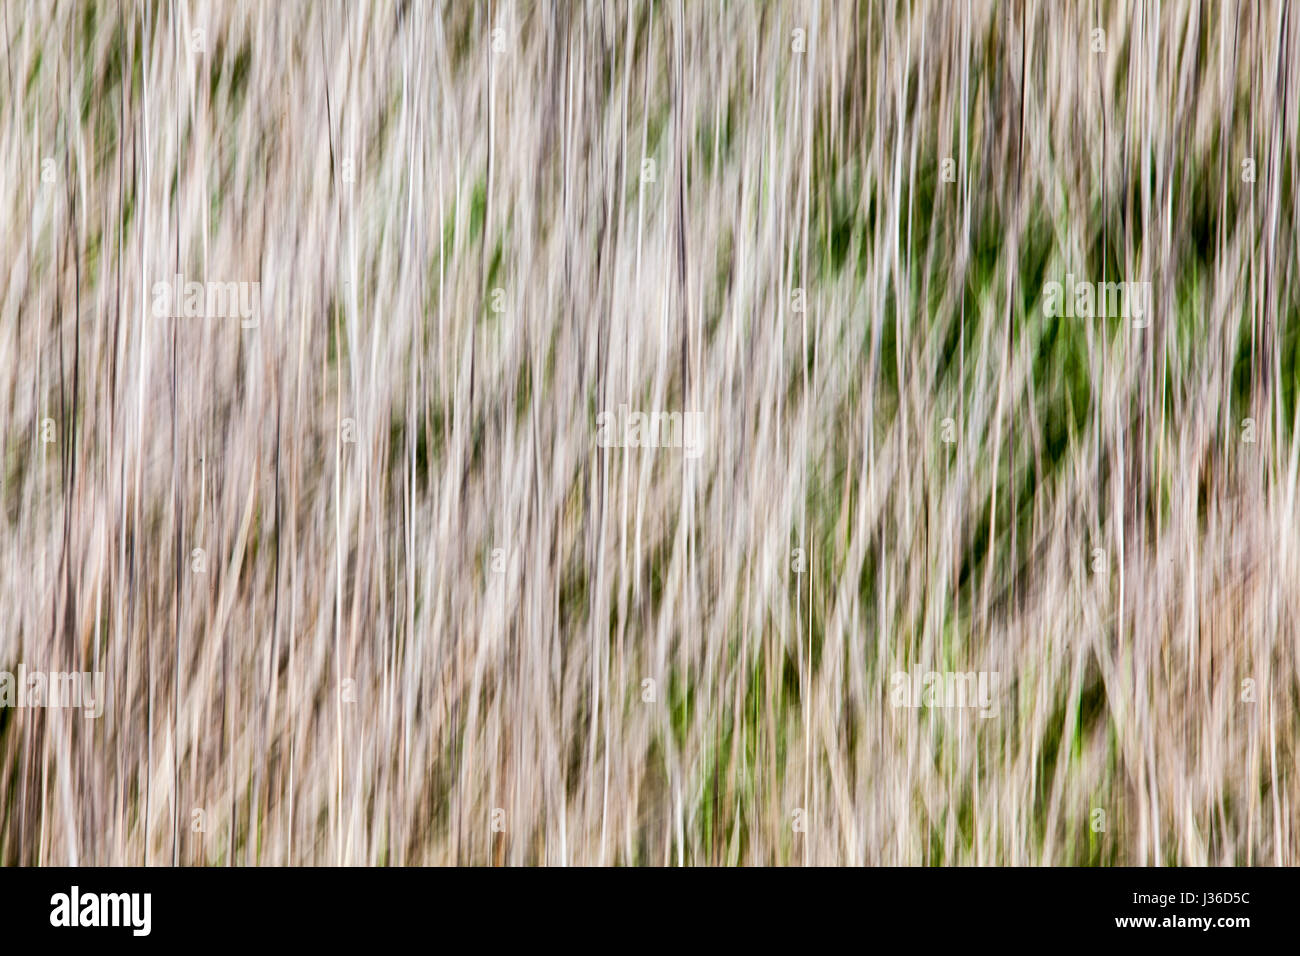 Abstract lines and structures in dry grass, closeup, with a blurred wipe effect Stock Photo